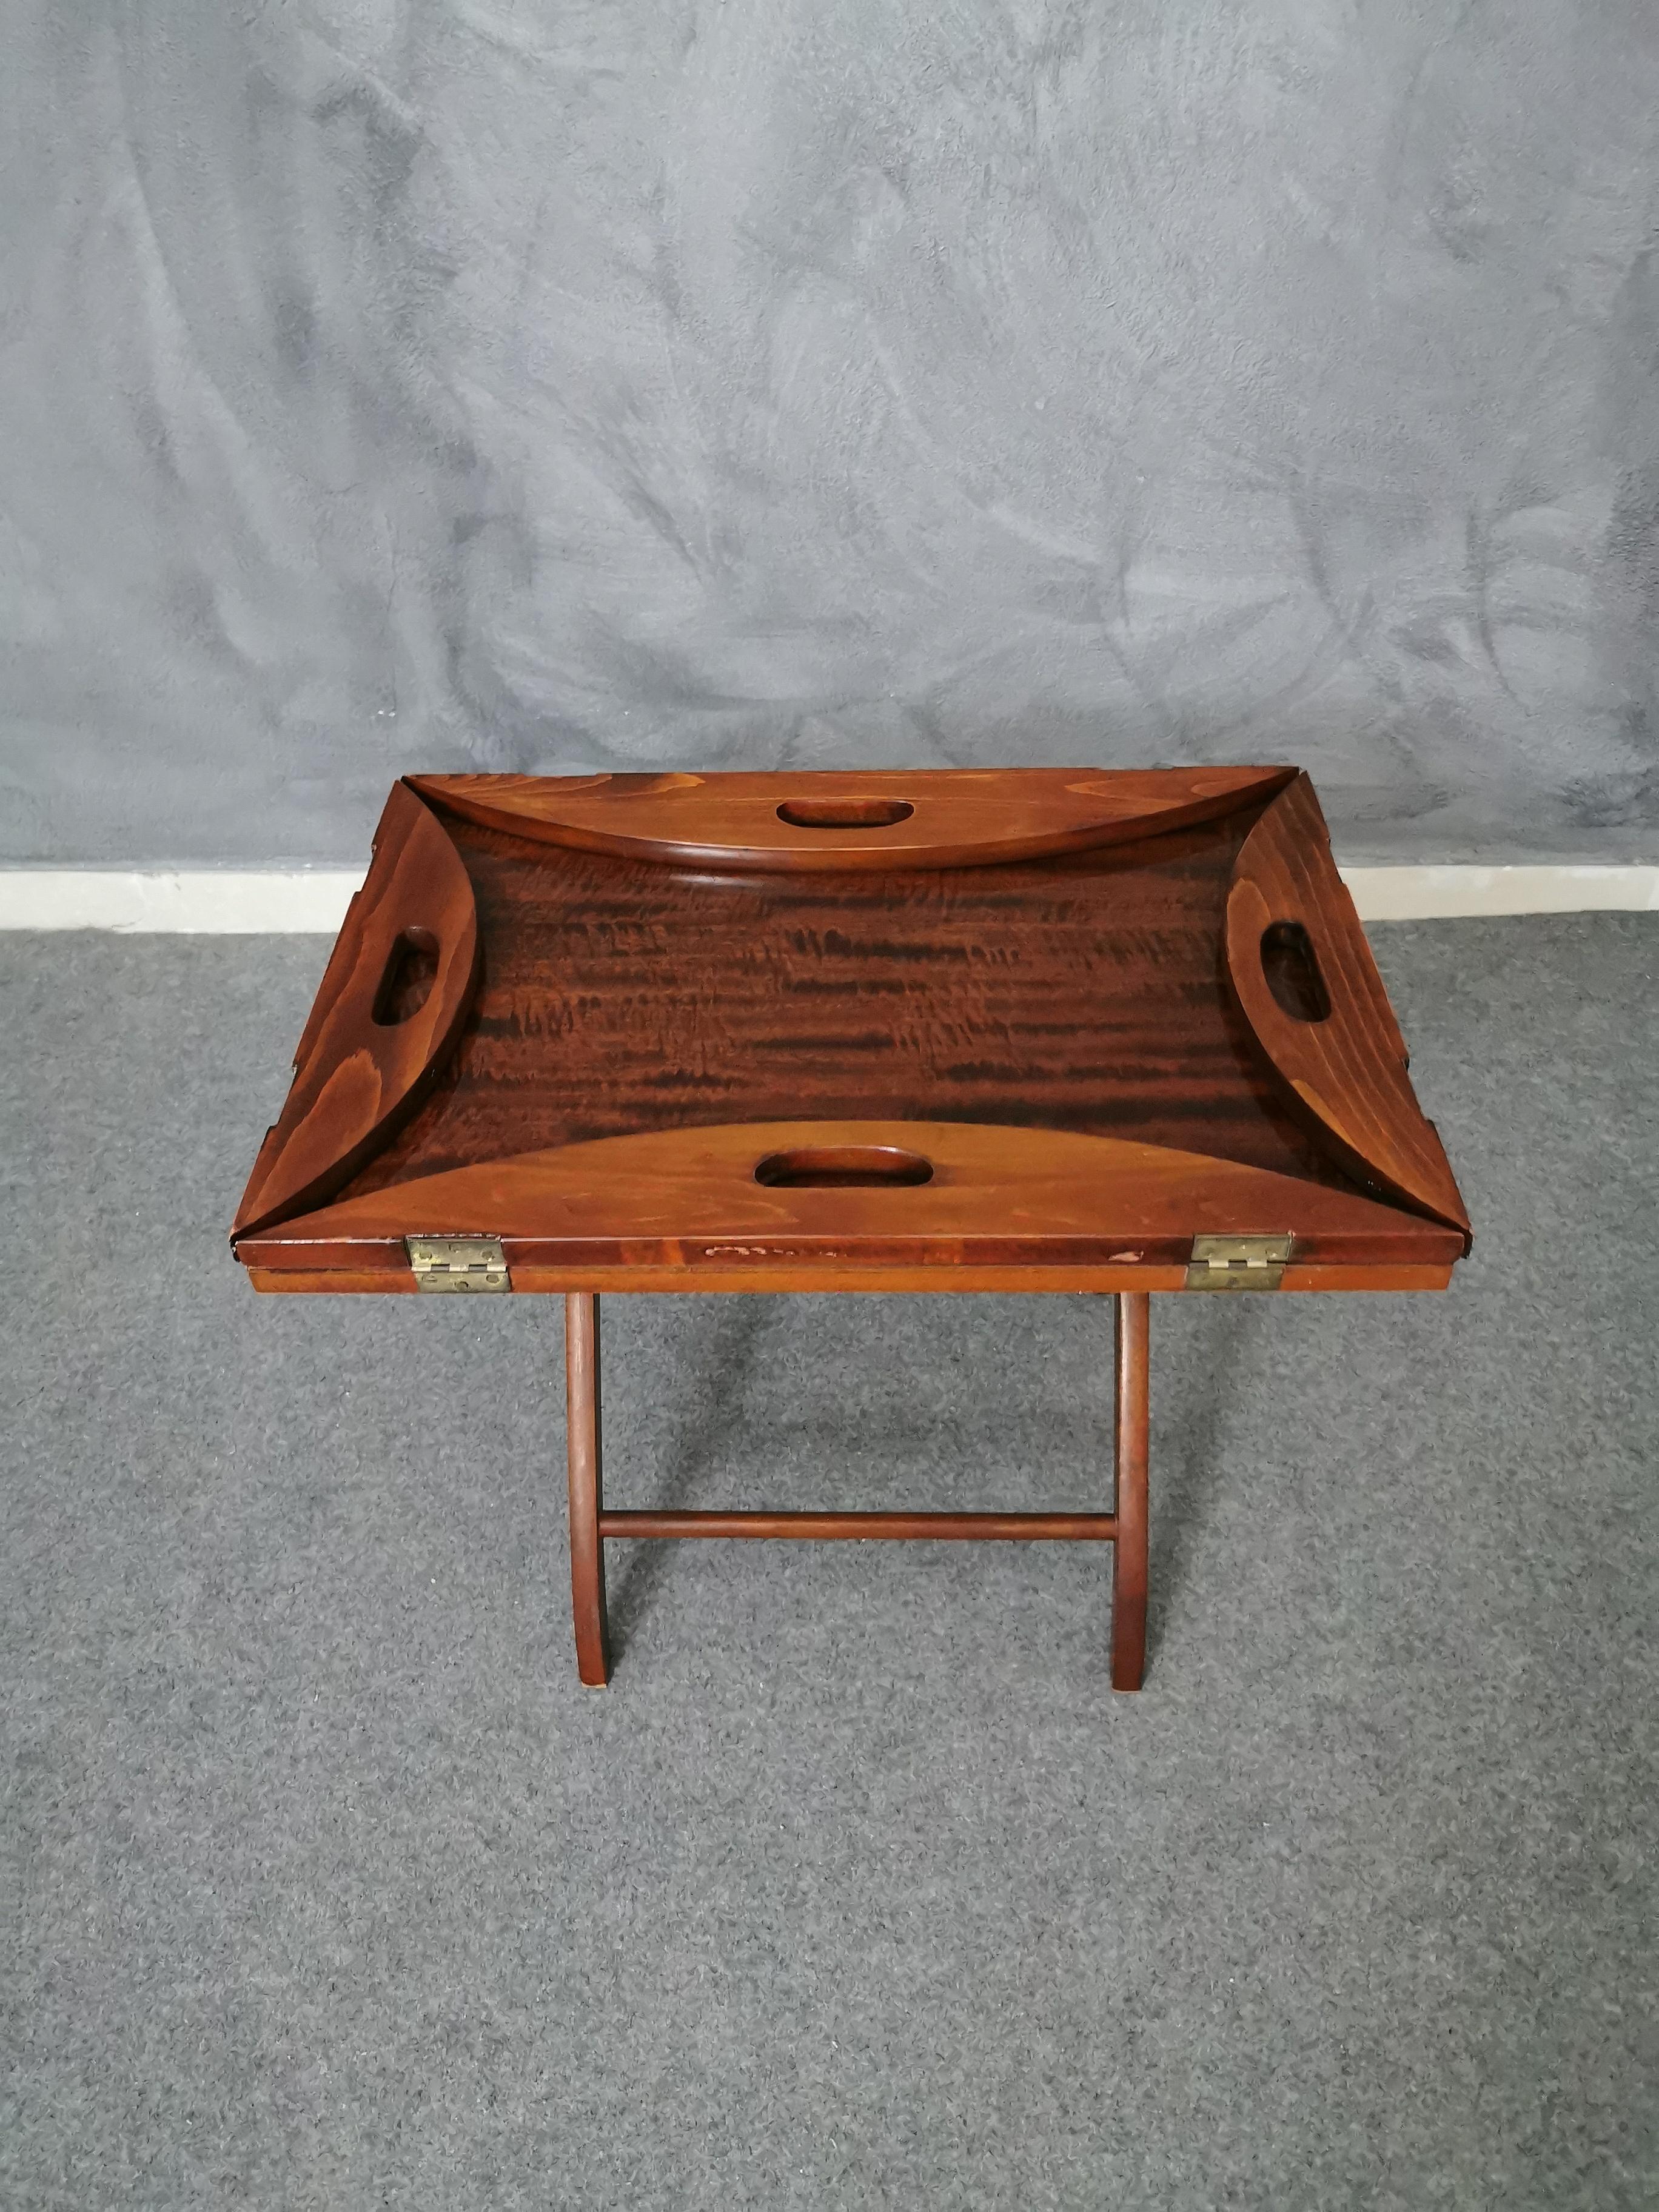 Wood coffee table by Svend Langkilde for Langkilde Mobler with pull-out top and sides and open and close feet. Scandinavian style from the 1950s.